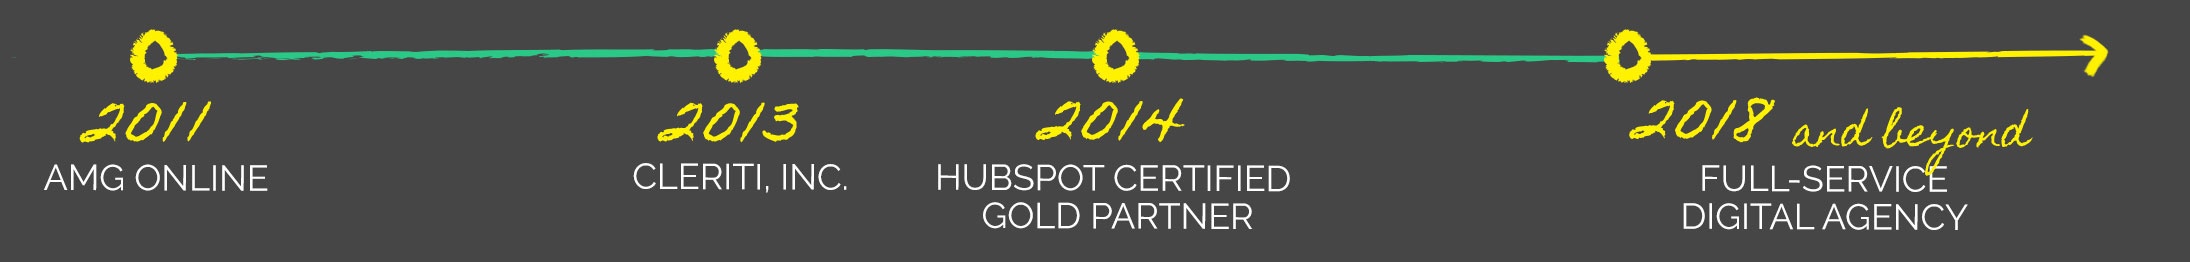 2011 AMG ONLINE, 2013 CLERITI, INC. 2014 HUBSPOT CERTIFIED GOLD PARTNER, 2018 and beyond FULL-SERVICE DIGITAL AGENCY.